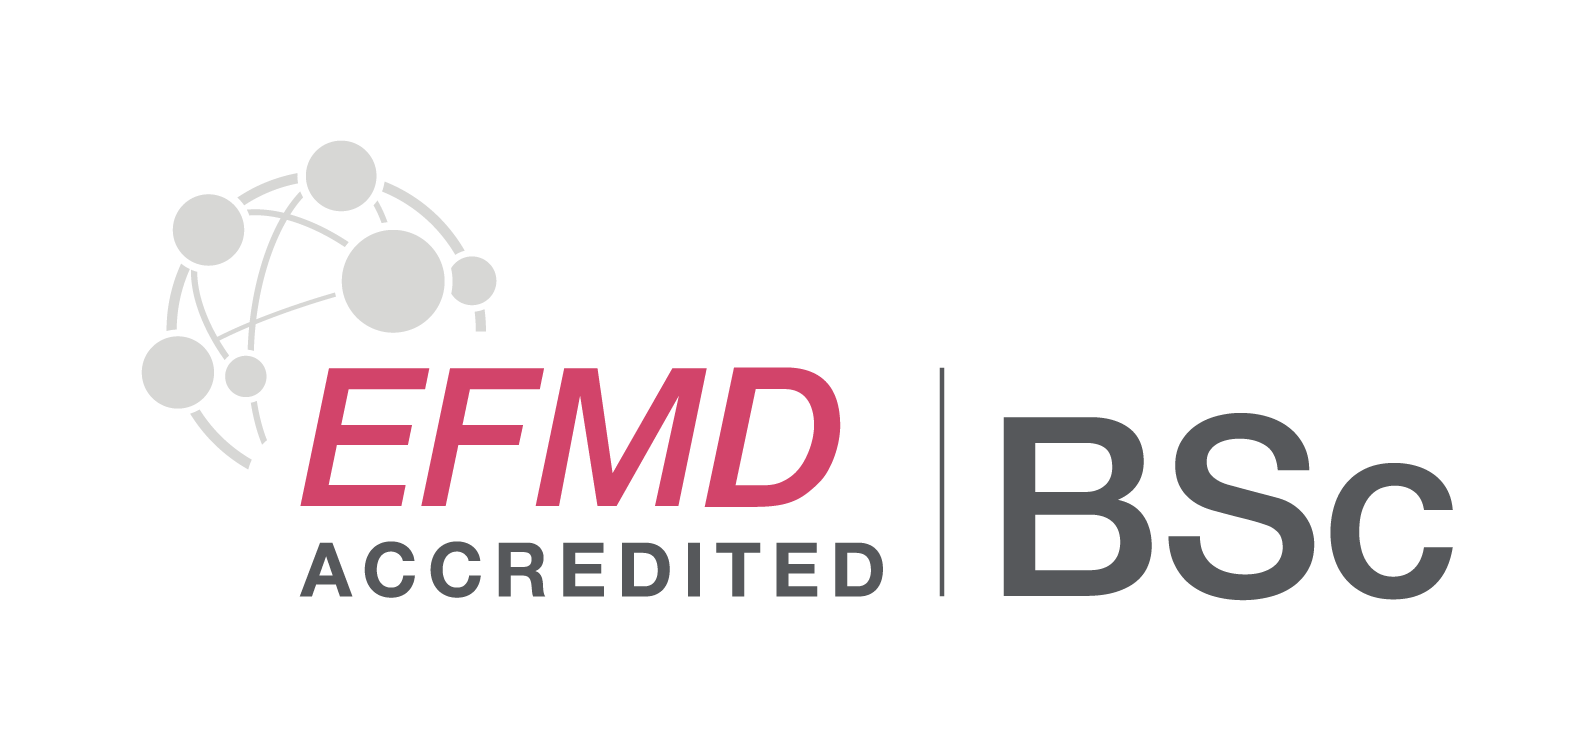 EFMD Accredited BSc